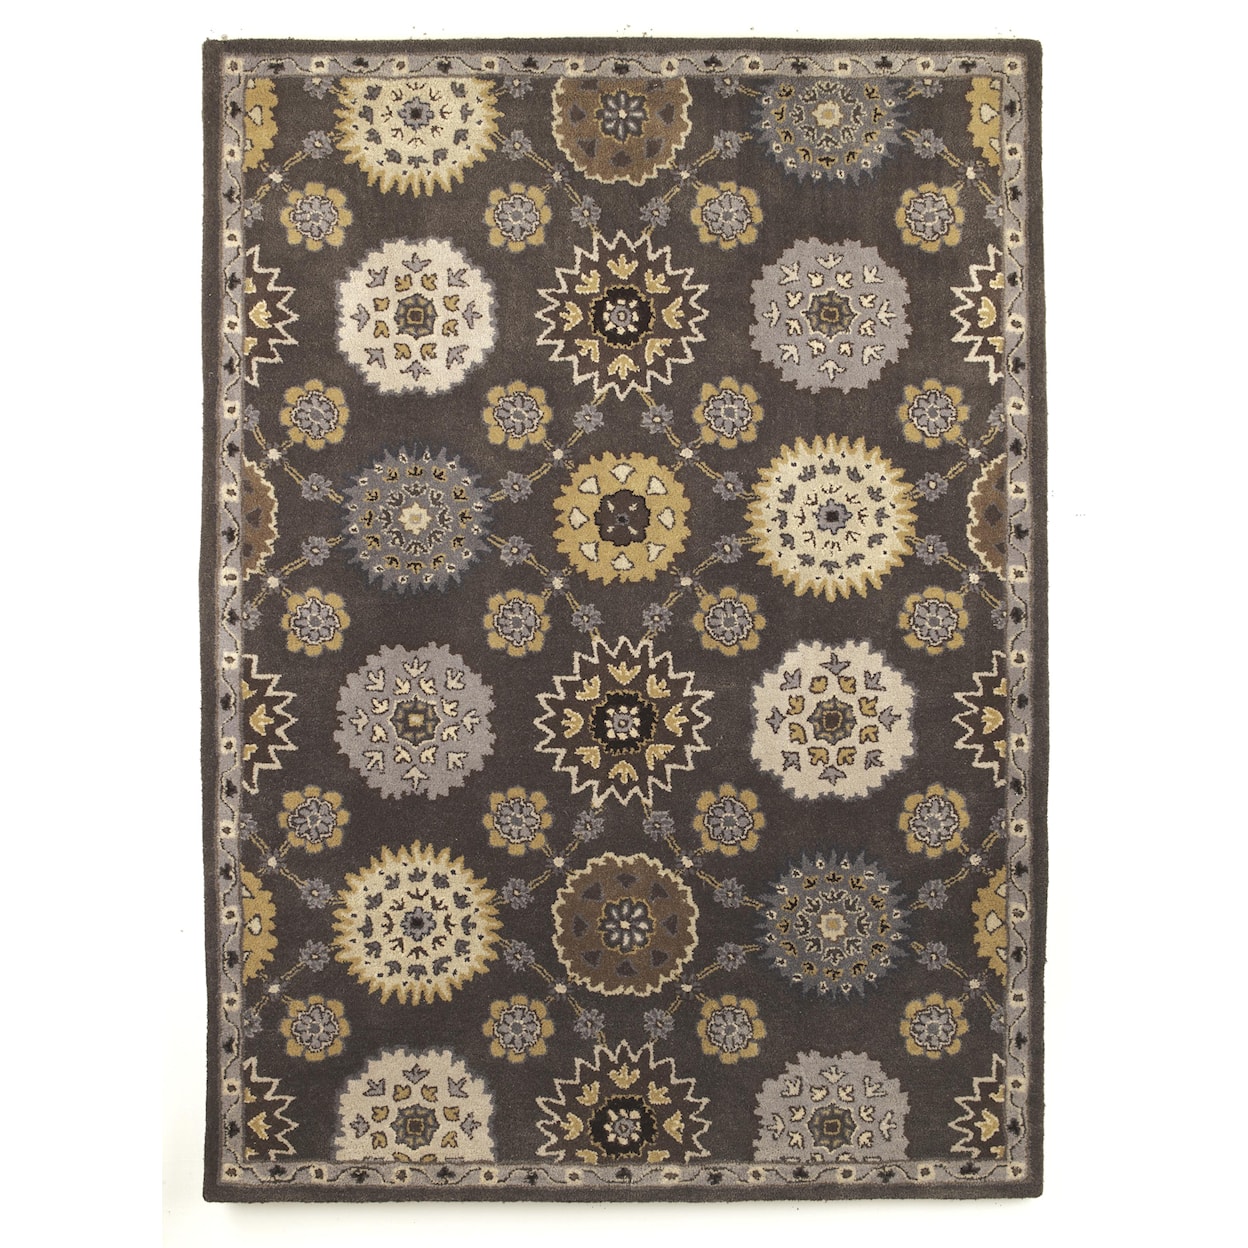 Signature Design by Ashley Transitional Area Rugs Charlemagne - Charcoal Medium Rug